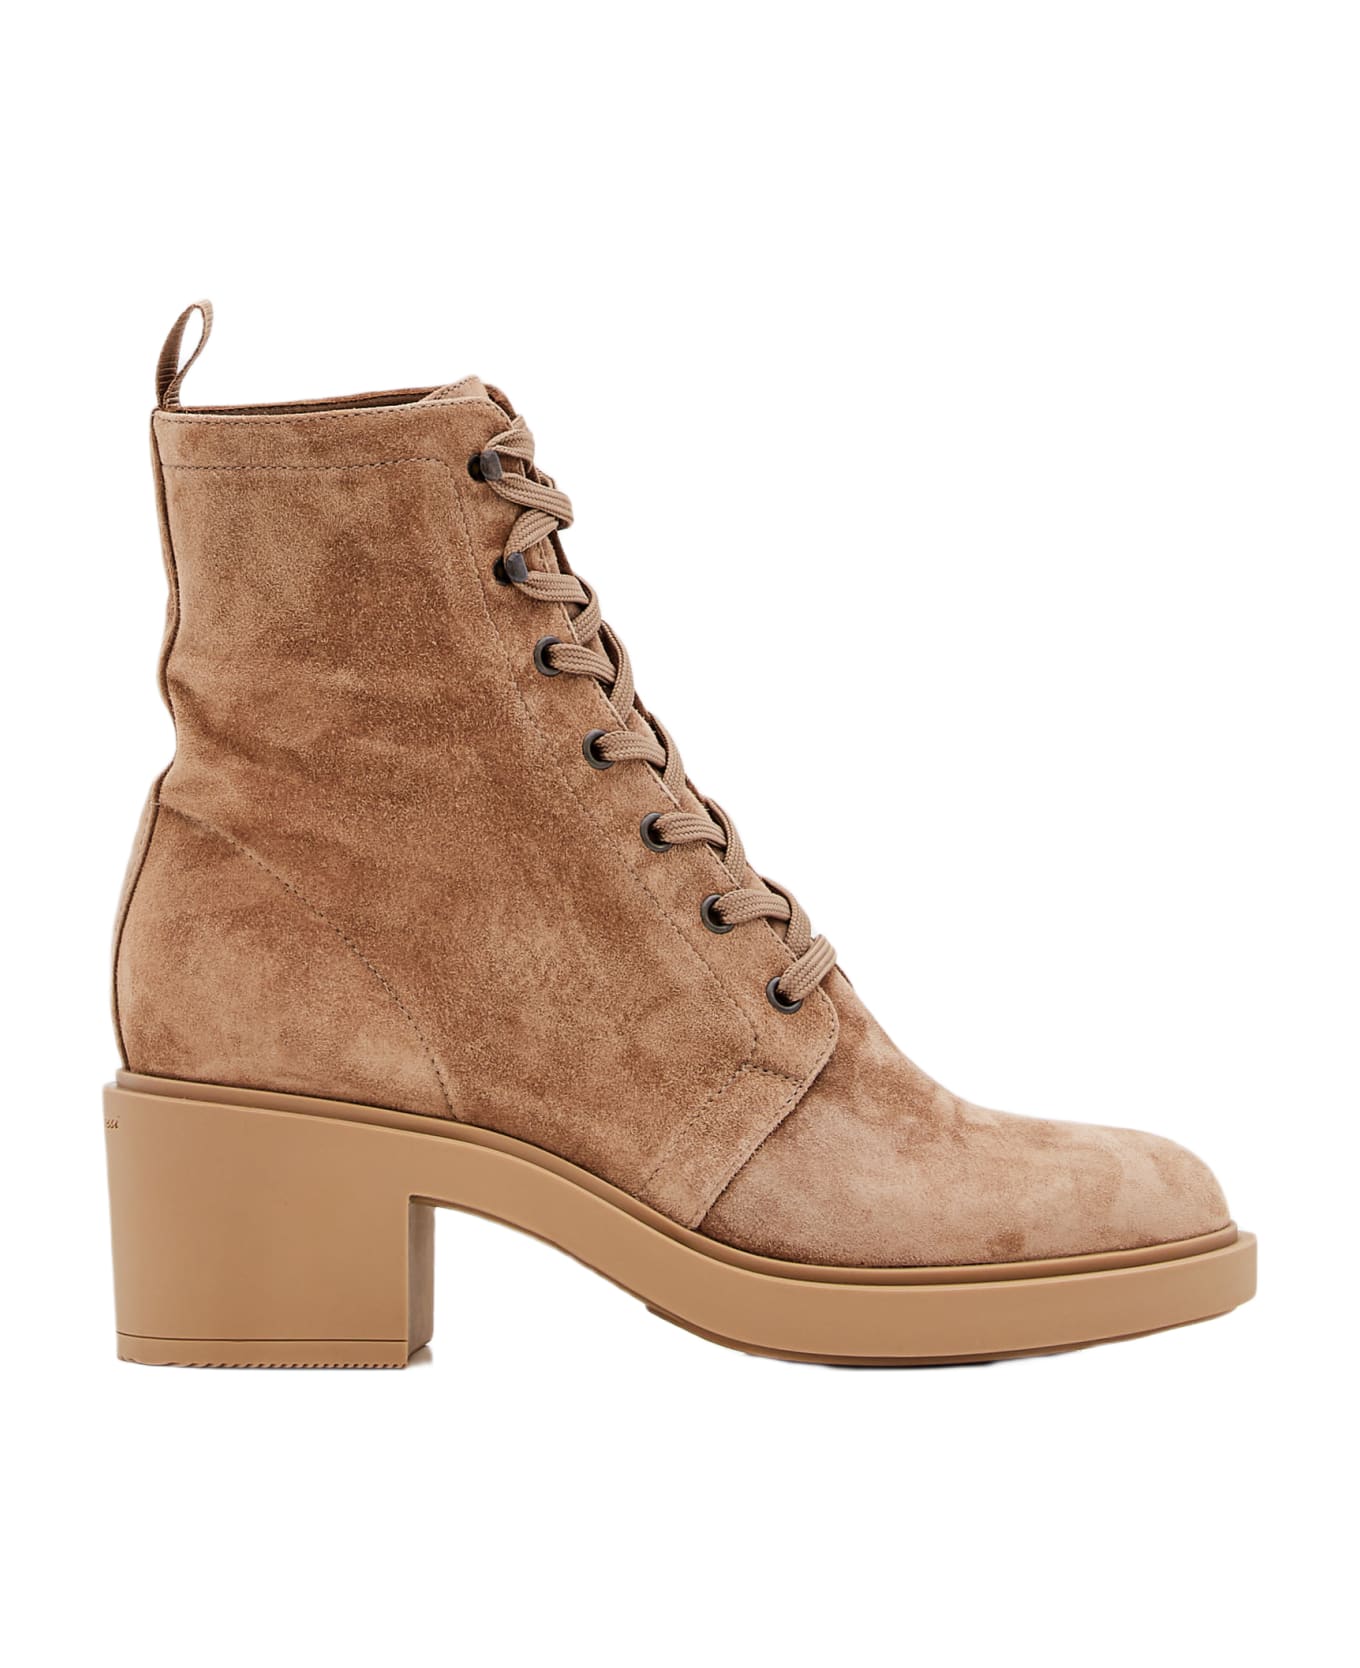 Gianvito Rossi Foster Lace-up Suede Boots - Brown